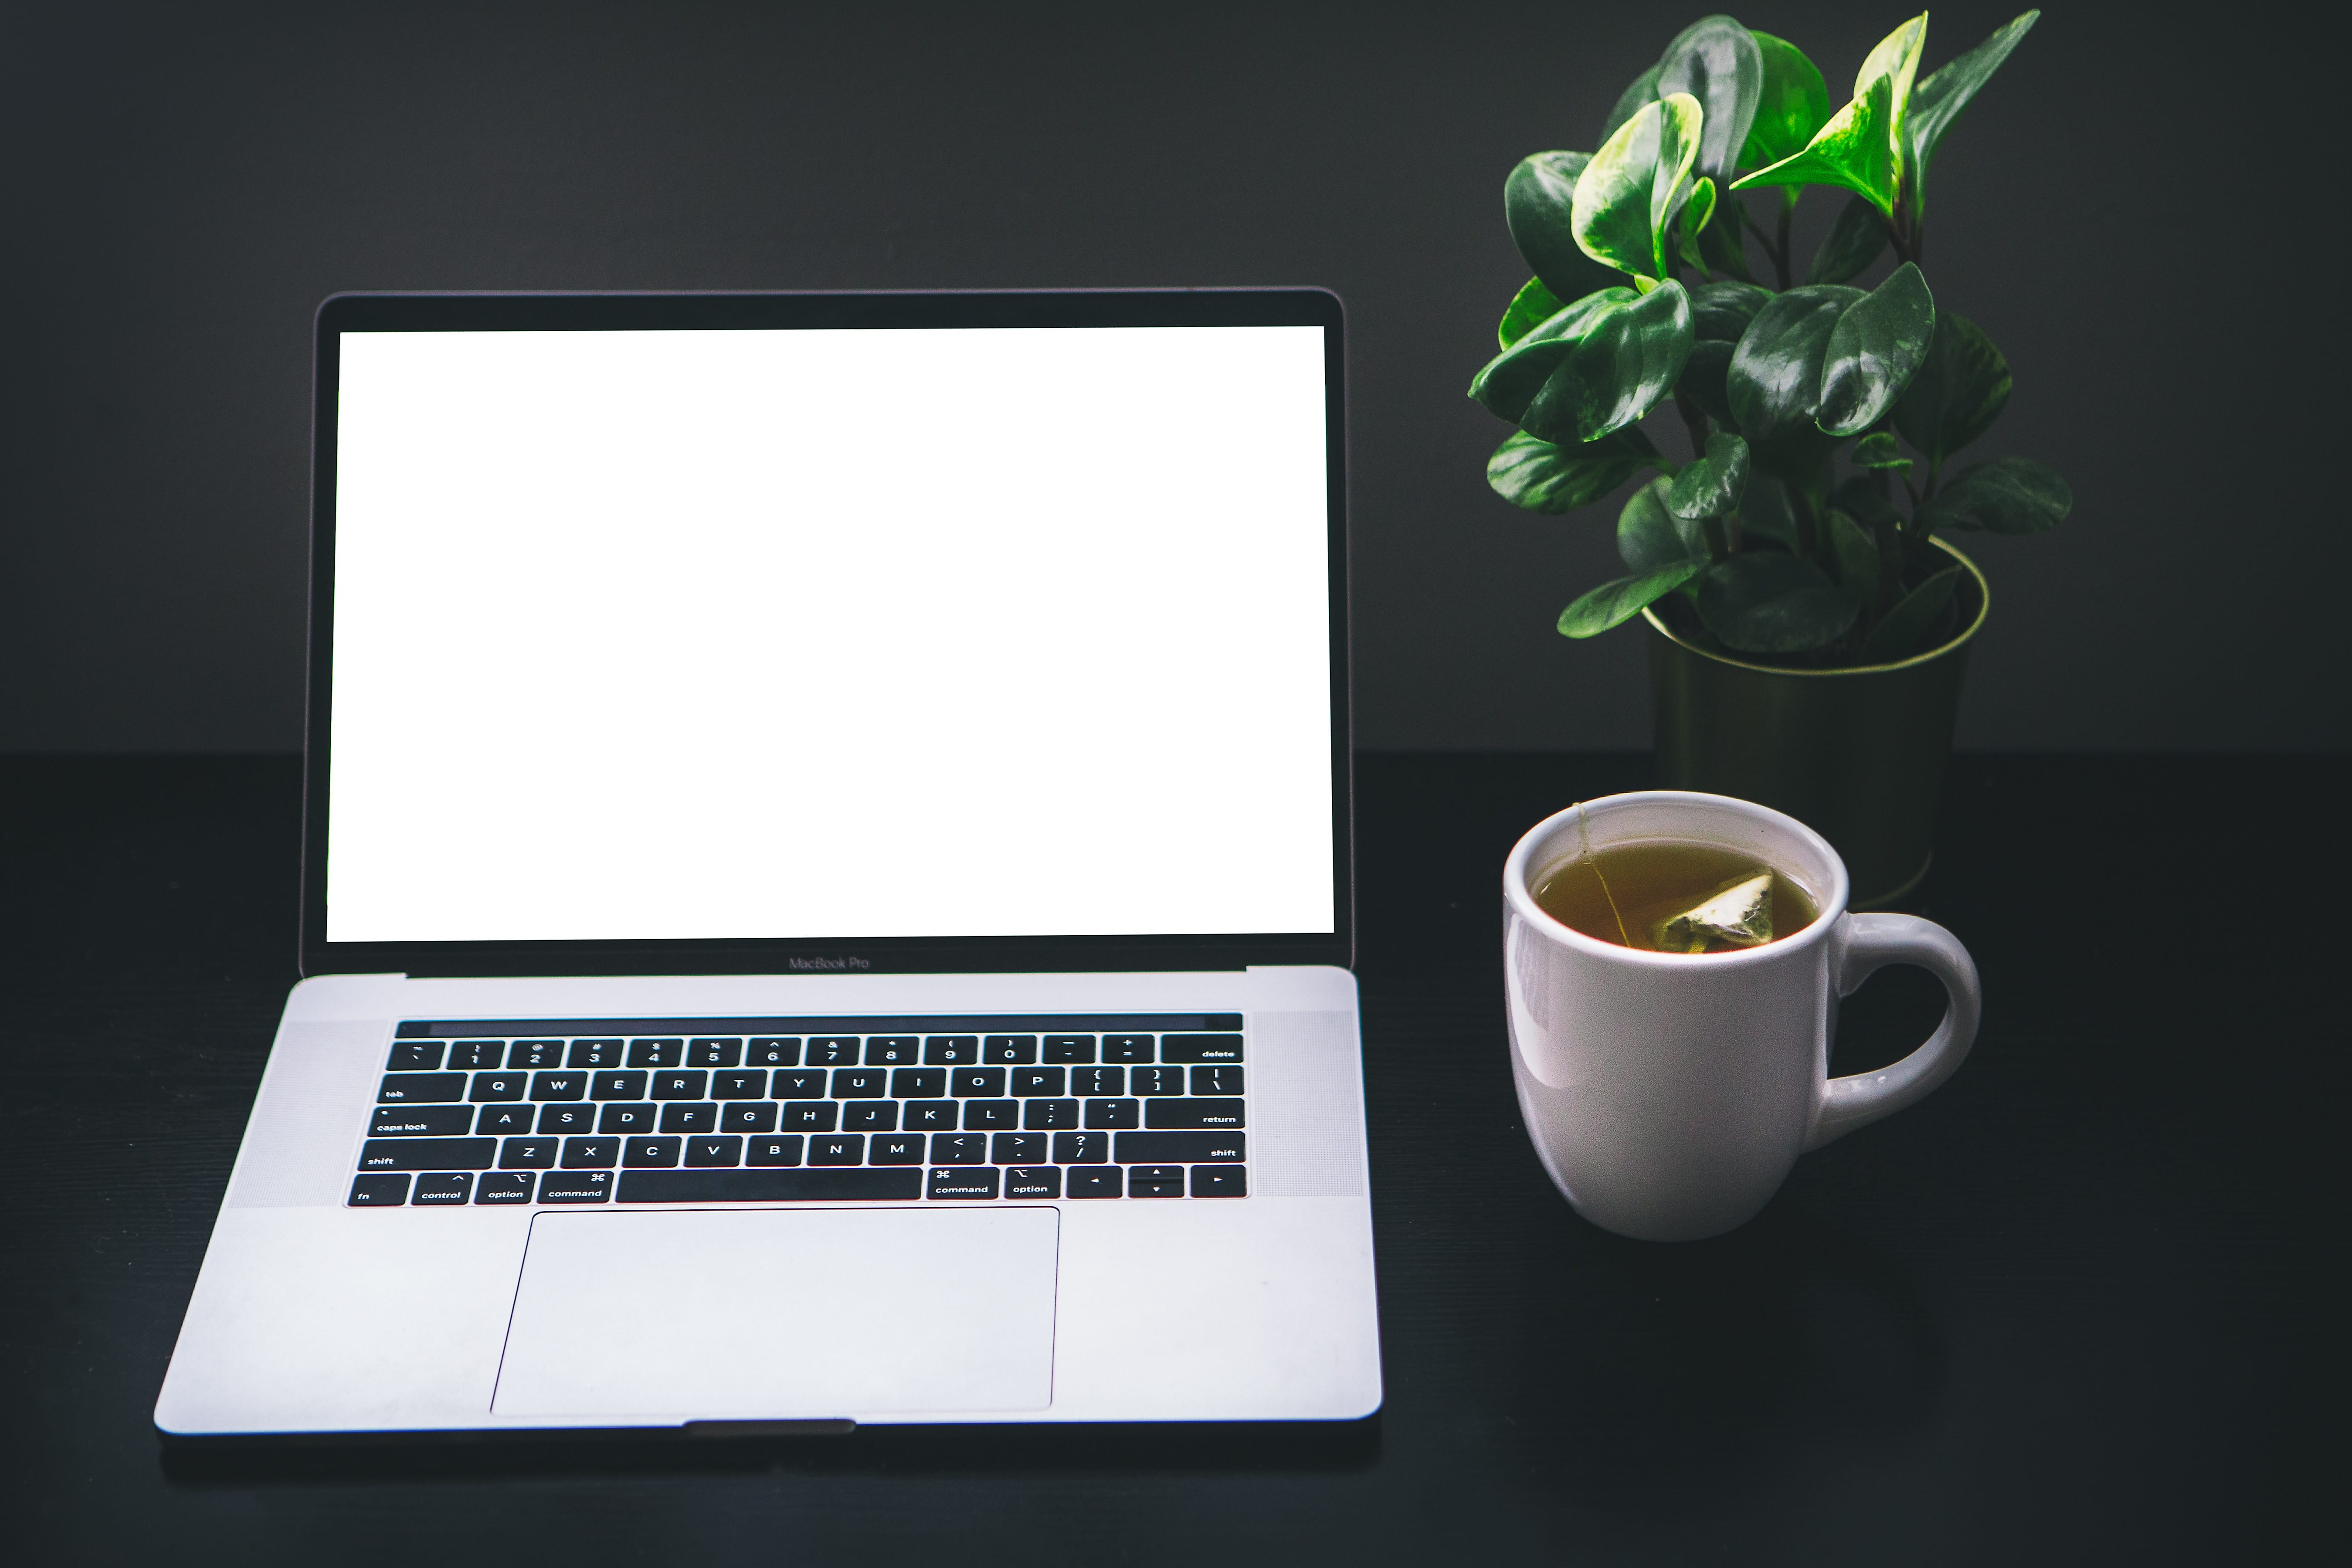 A laptop next to a plant and a cup of tea representing a person taking time to gather information at home on their own time.